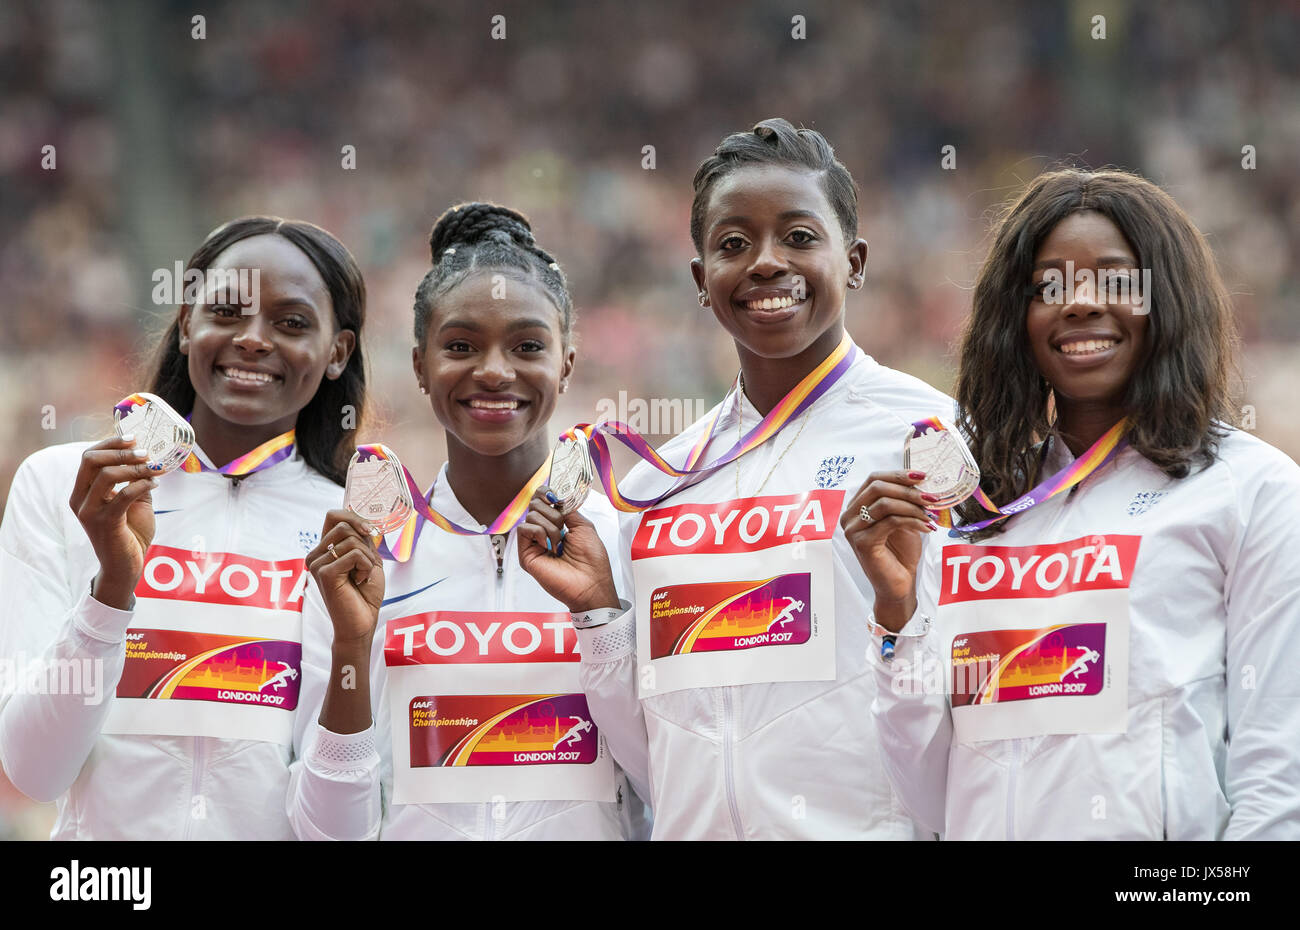 London, UK. 13th Aug, 2017. The Women's Great Britain 4x100 metres Silver medal winners (l-r) Daryll NEITA, Dina ASHER-SMITH, Desiree HENRY & Asher PHILIP pose with there medals during the Final Day of the IAAF World Athletics Championships (Day 10) at the Olympic Park, London, England on 13 August 2017. Photo by Andy Rowland/PRiME Media Images./Alamy Live News Stock Photo